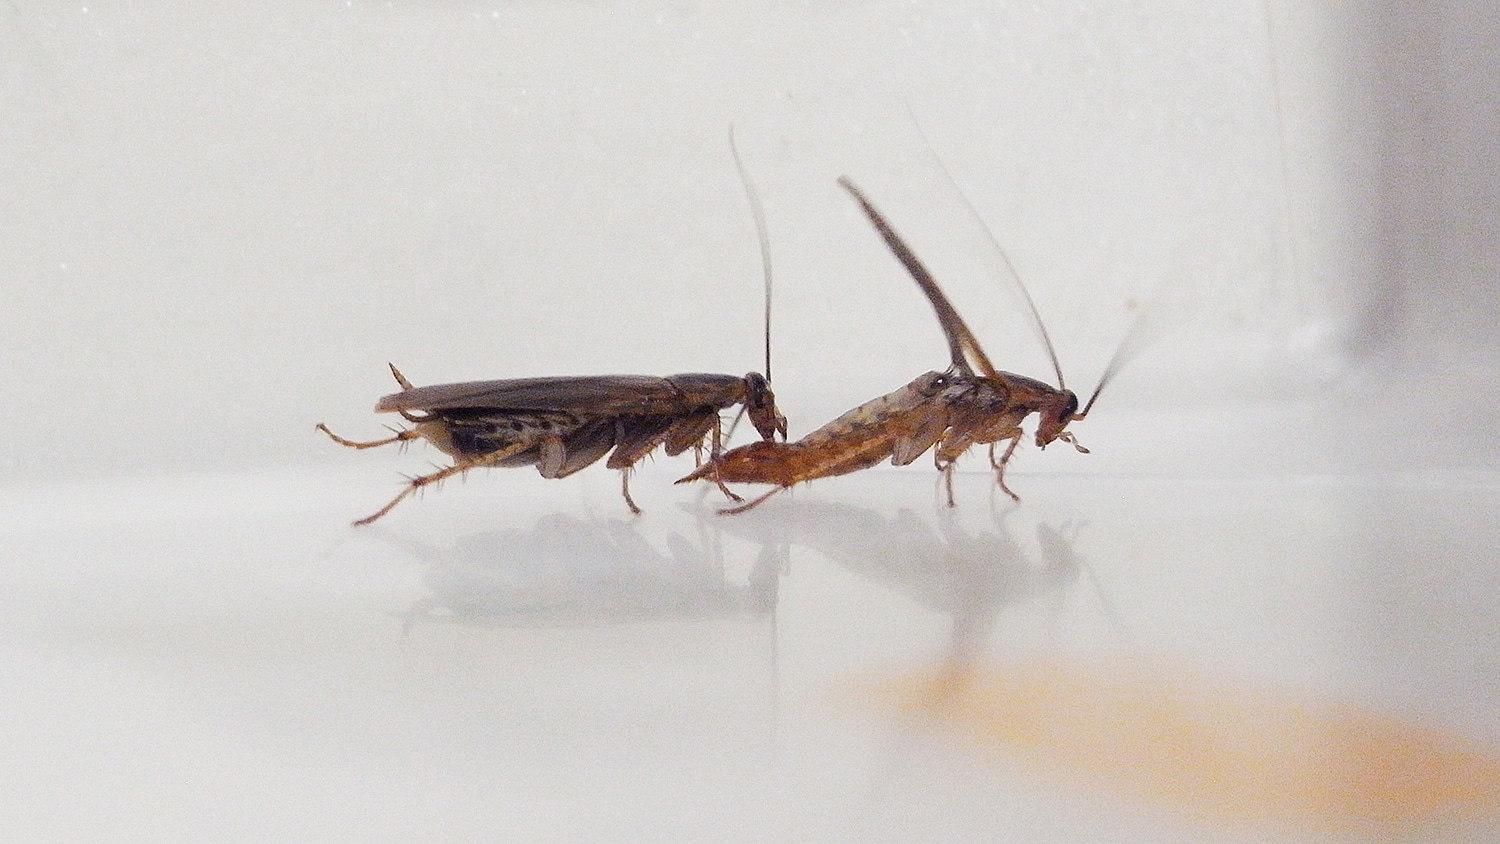 Female cockroach feeding on gift from male cockroach